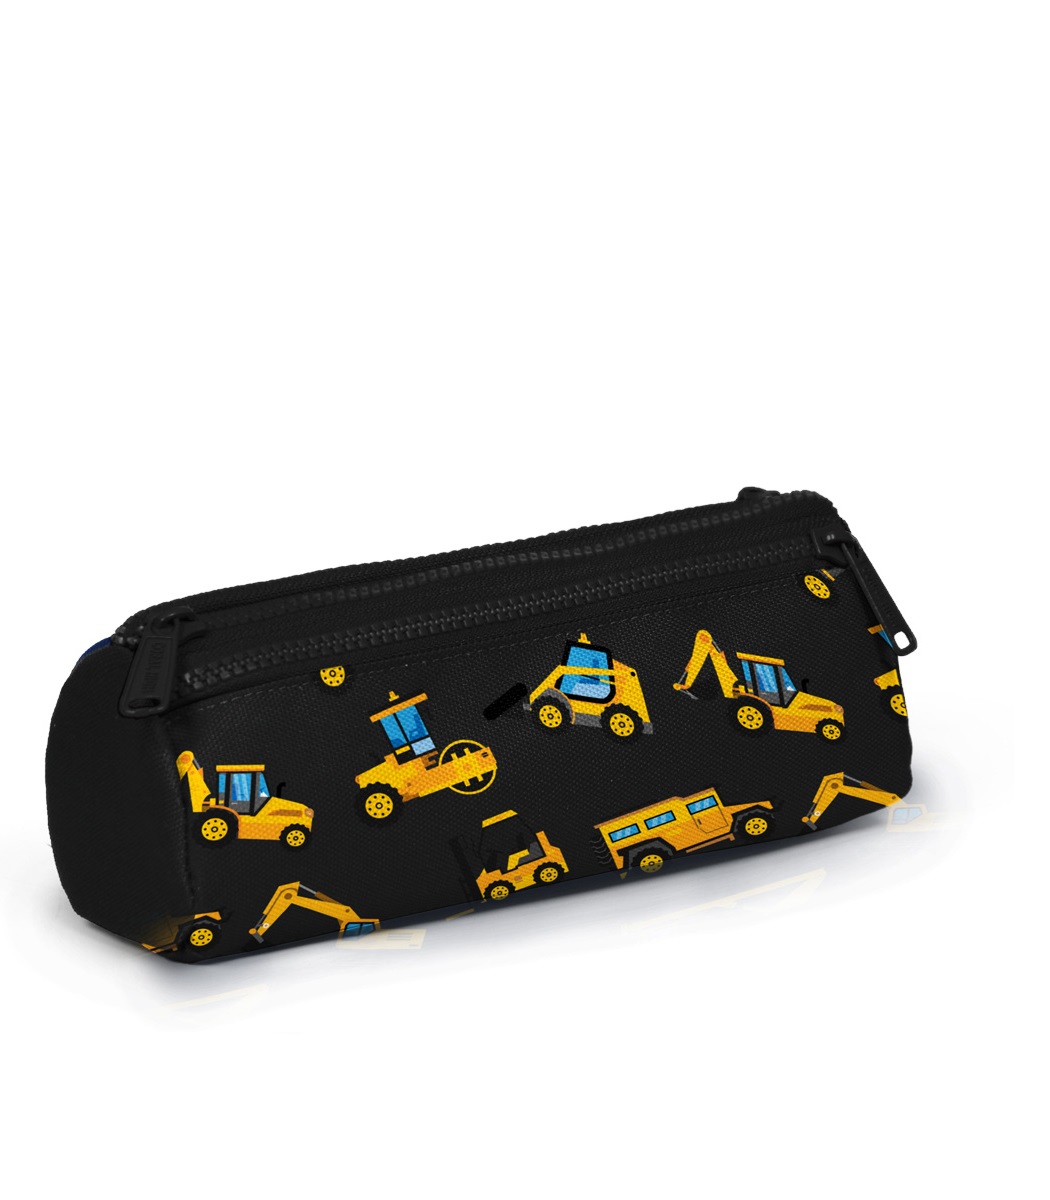 Coral High Kids Three Compartment Pencil case - Black Yellow Construction Machine Pattern